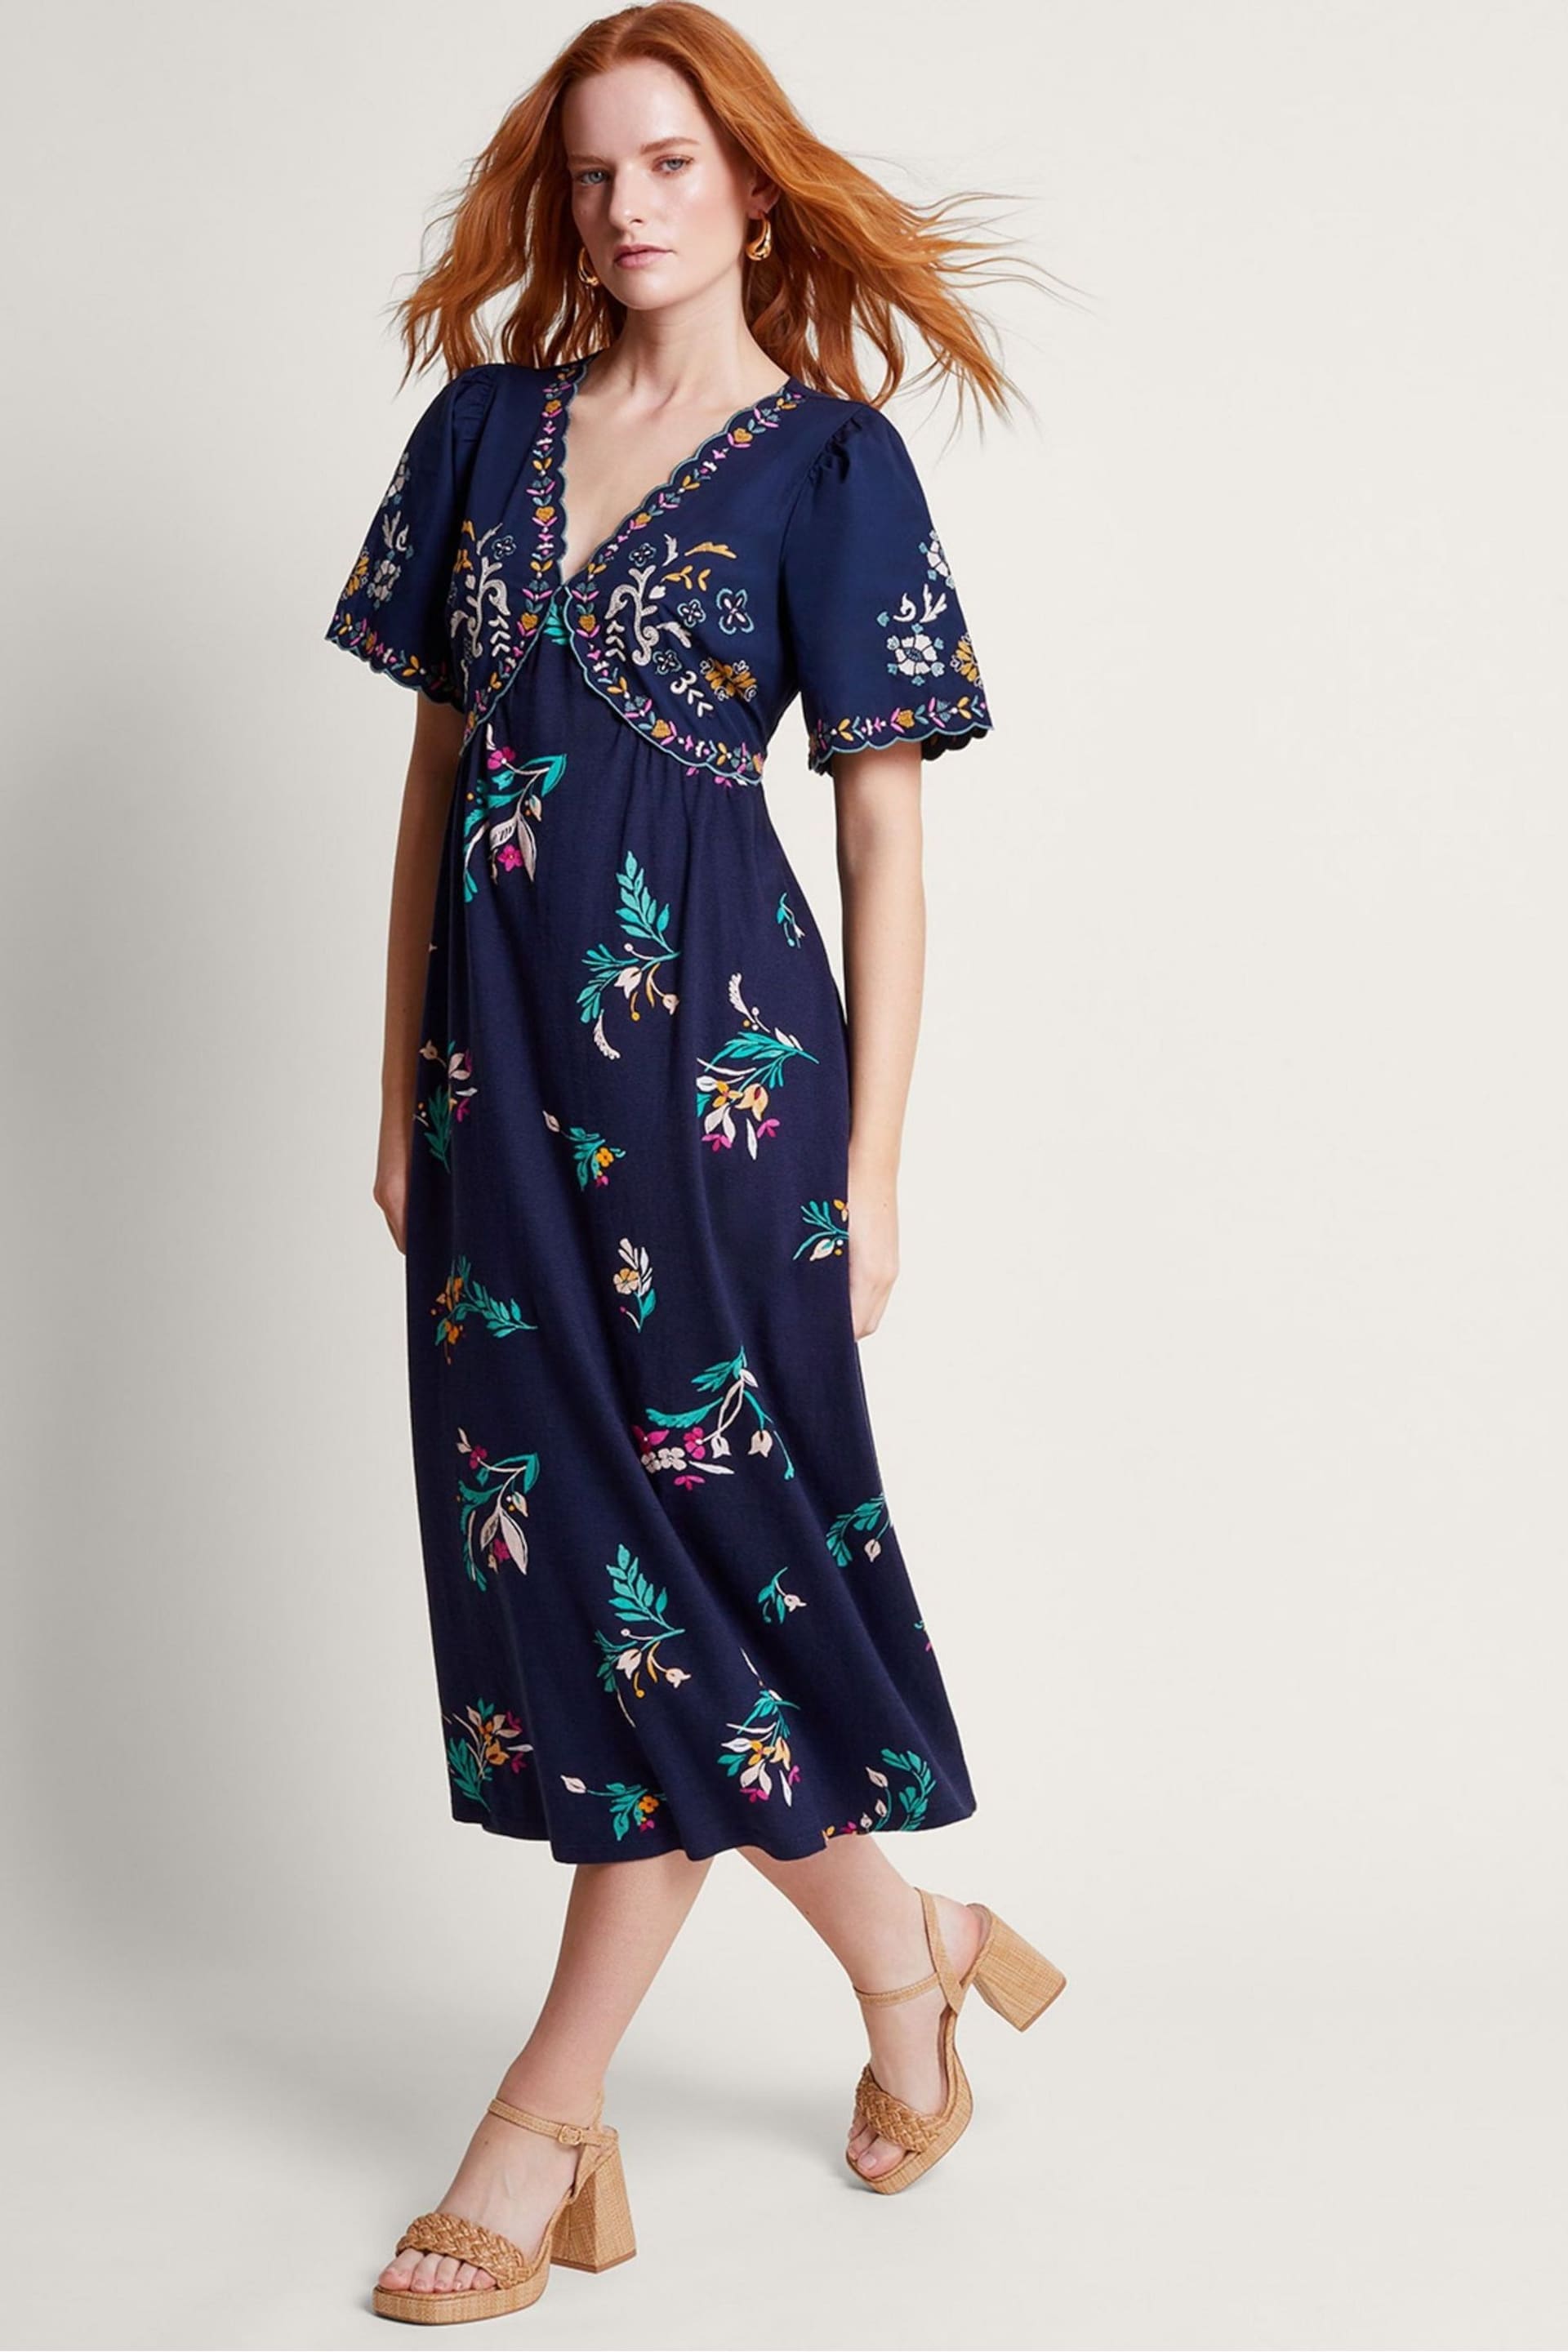 Monsoon Blue Maya Floral Embroidered Dress - Image 1 of 4